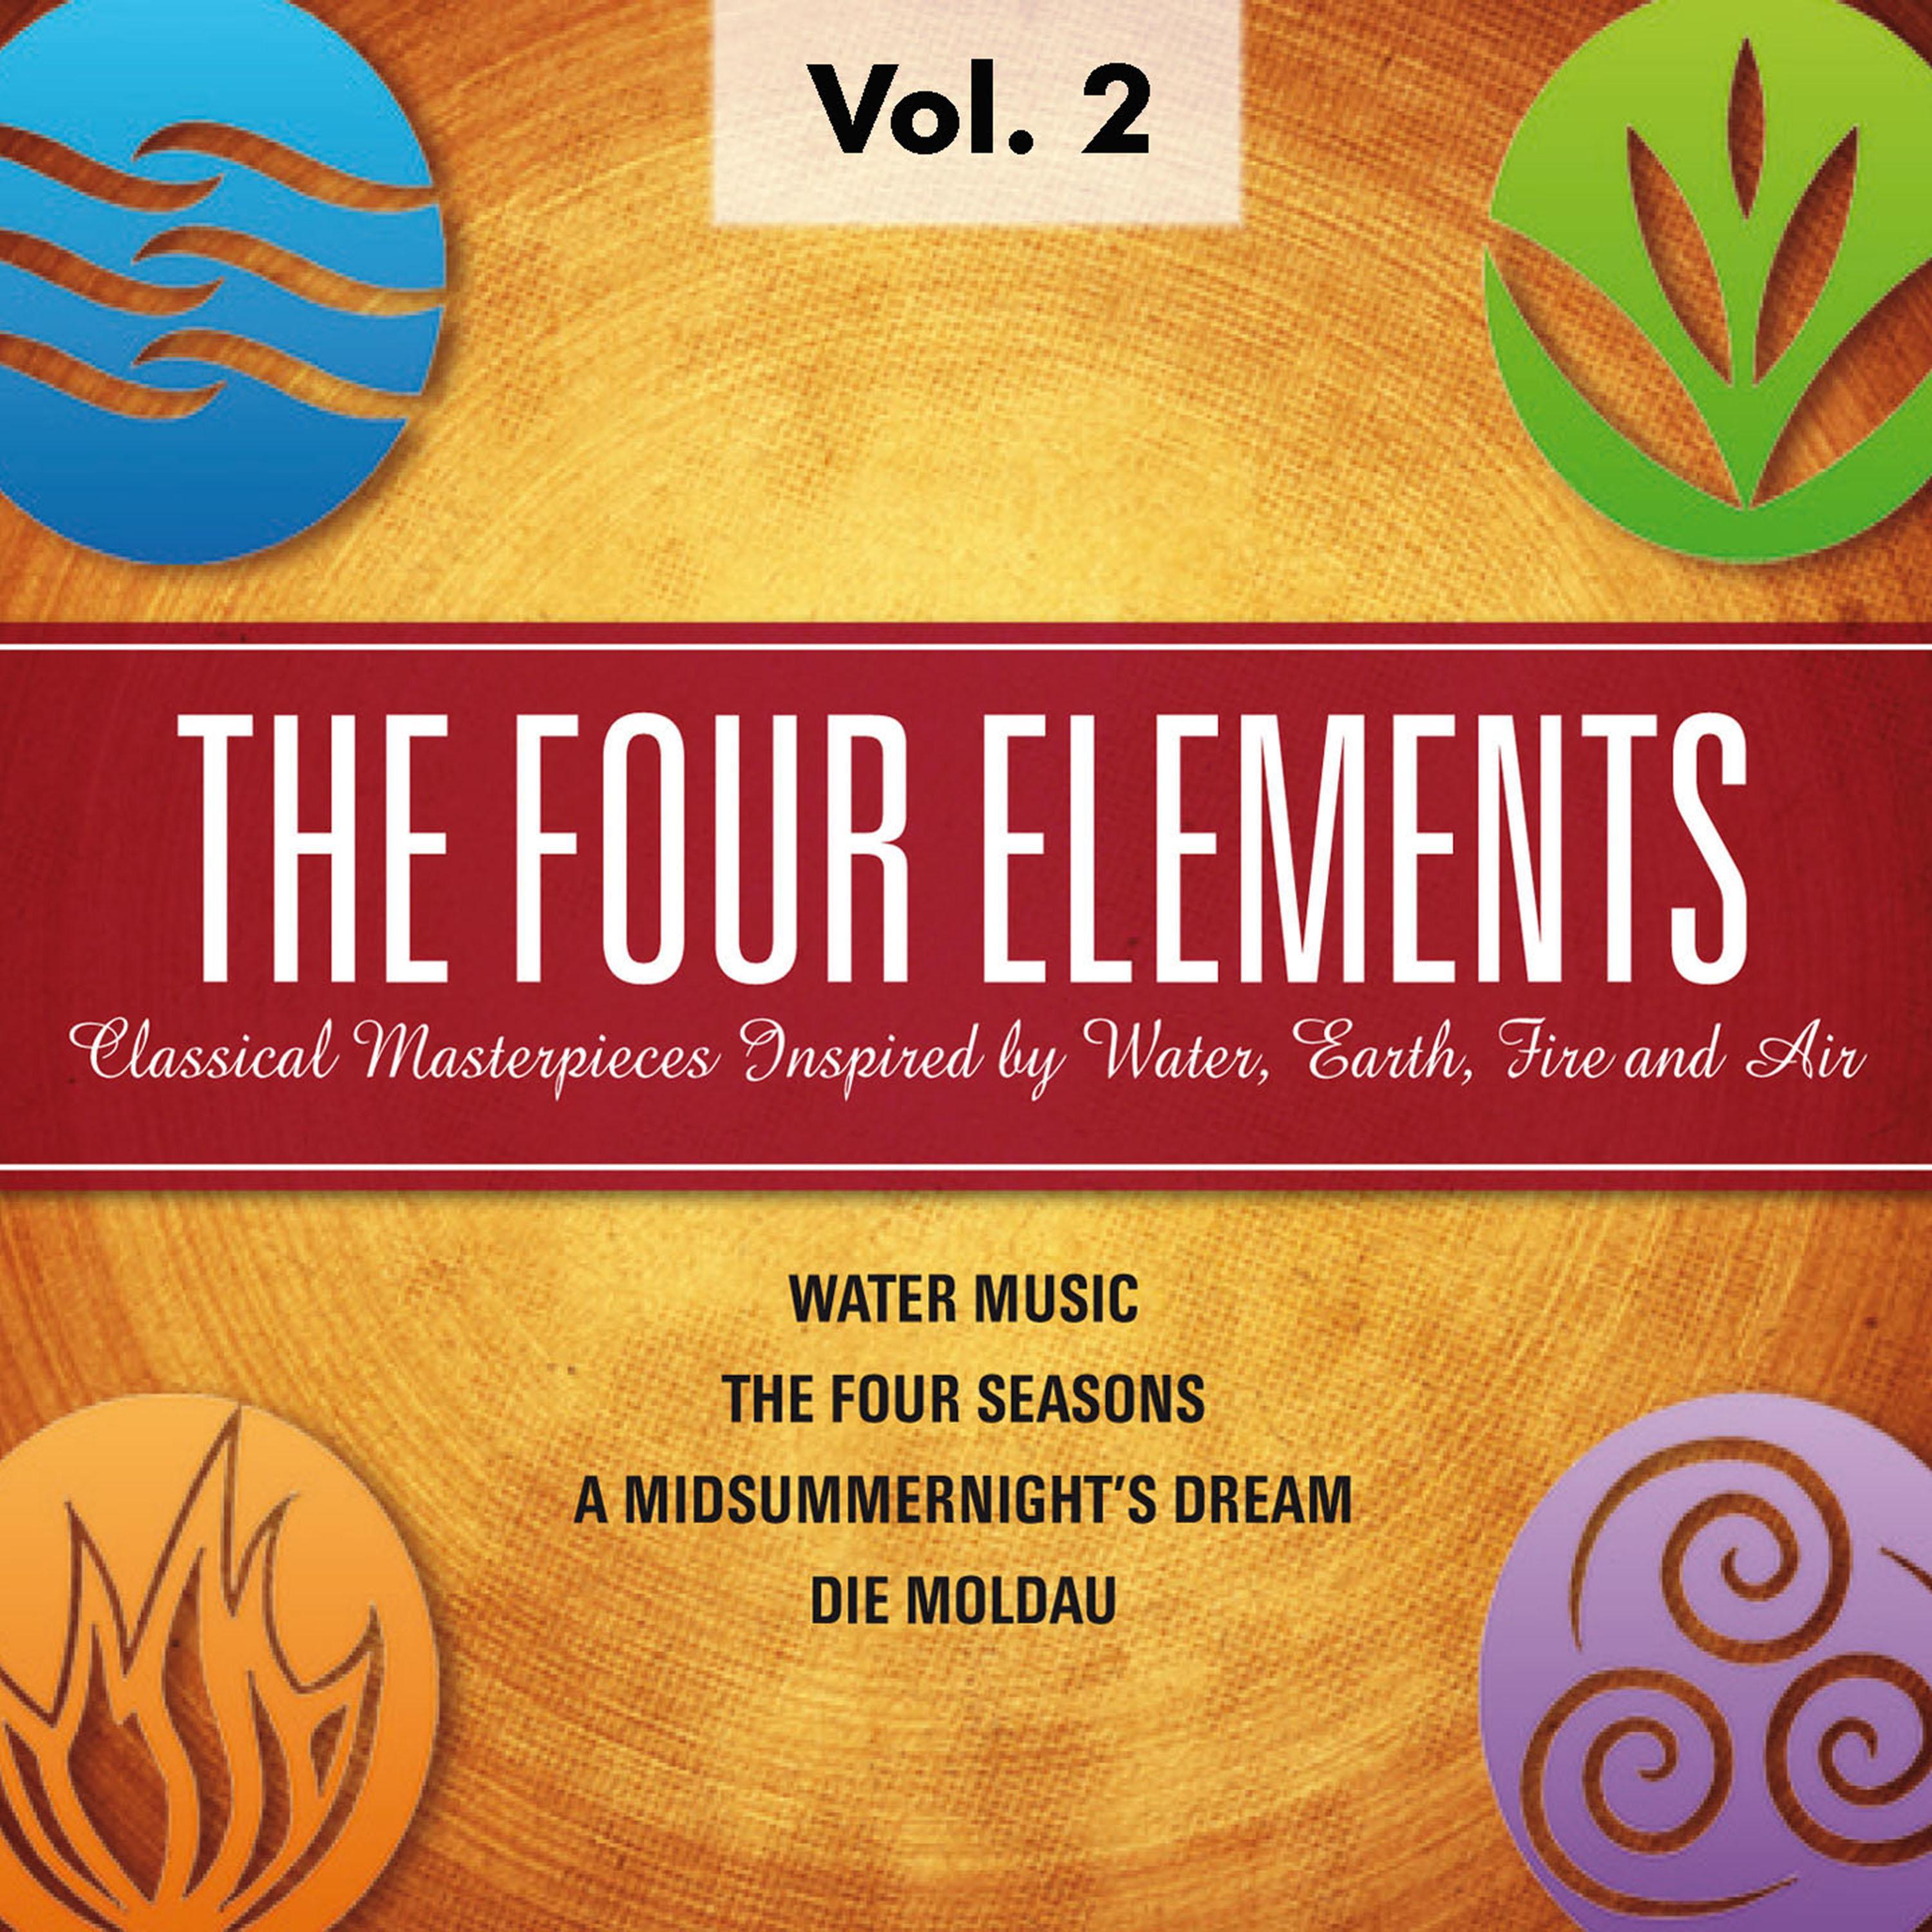 The Four Elements - Classical Masterpieces Inspired by Water, Earth, Fire, Air, Vol.2